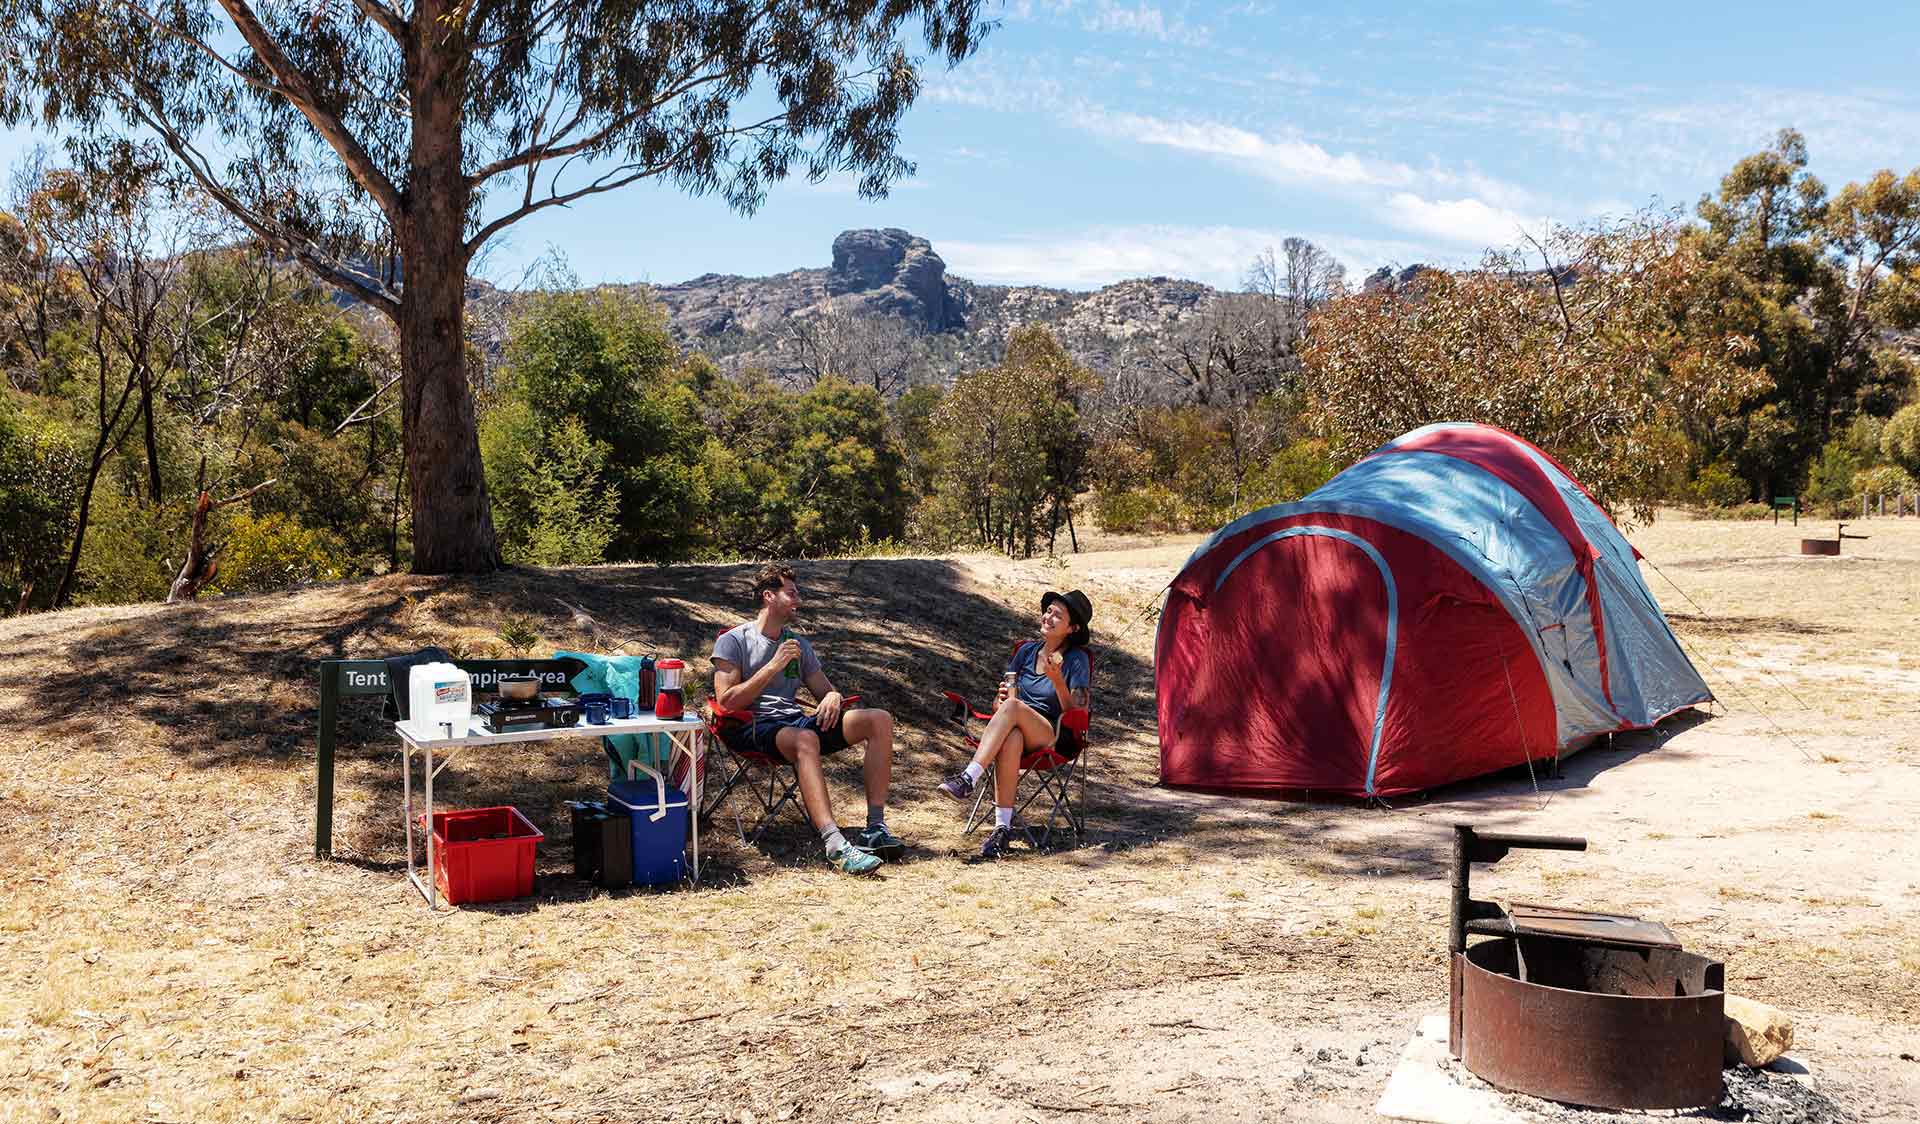 A couple in their twenties camp at the Mt Stapylton Campground in the Grampians National Park.